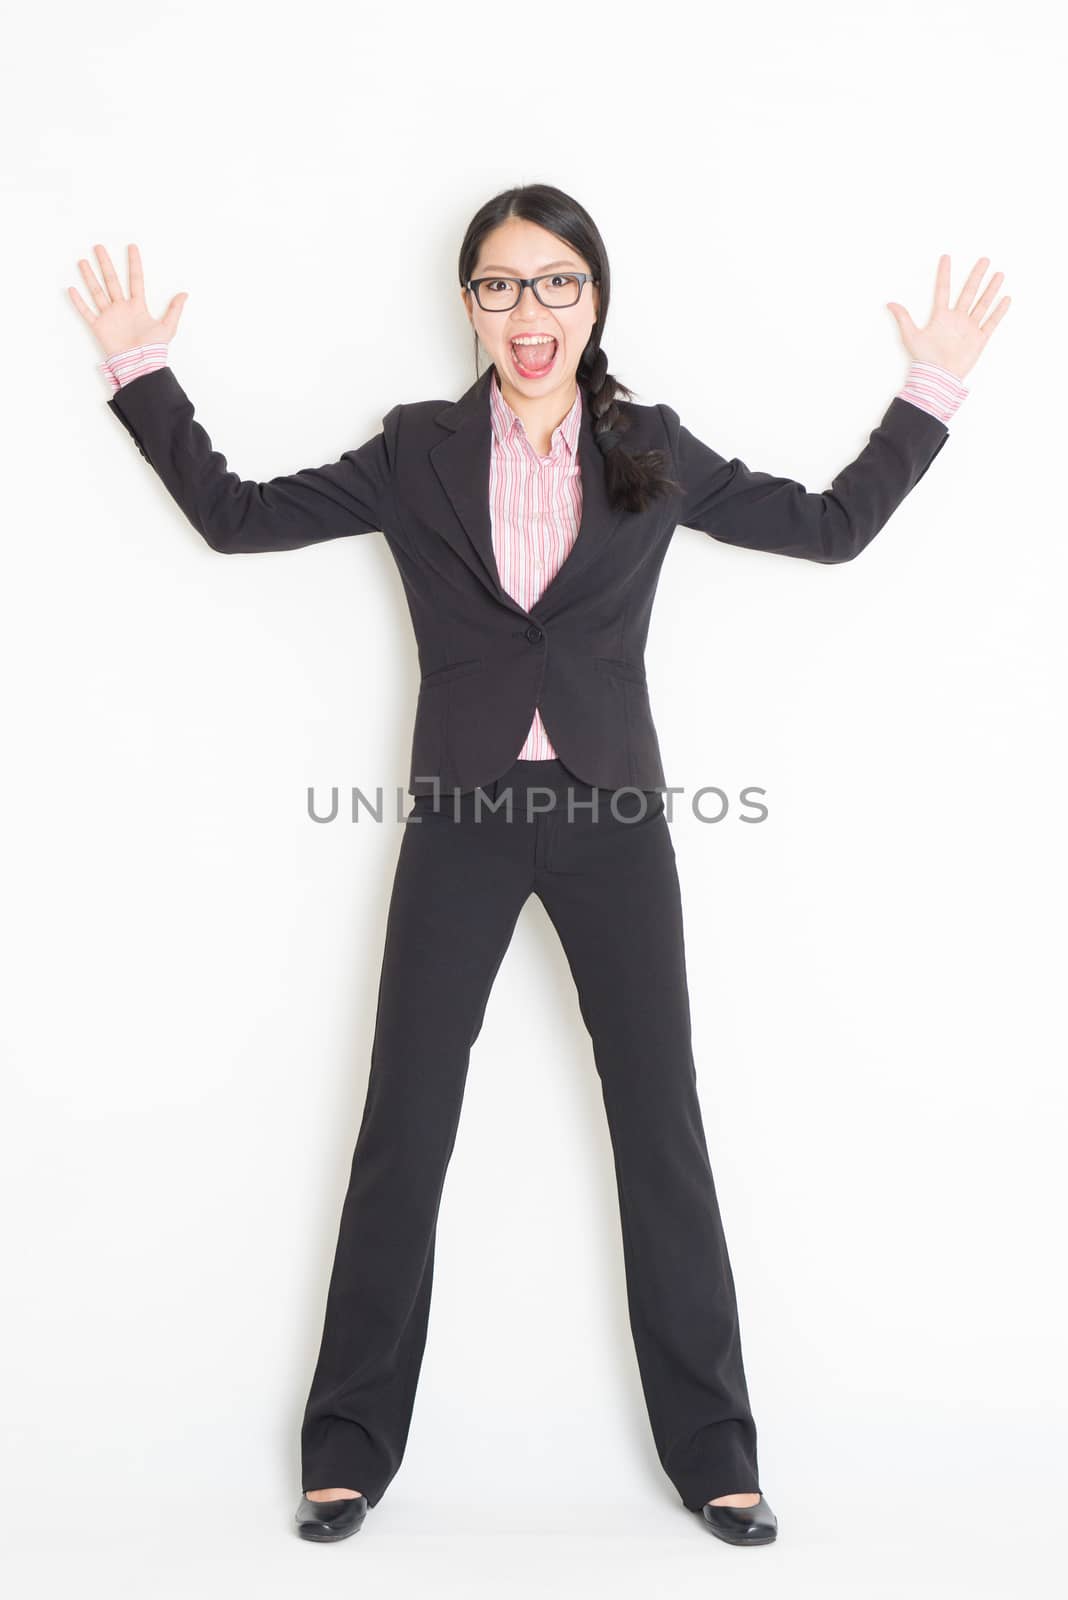 Full length front view of shocked young Asian businesswoman in formalwear leaning on wall, standing on plain background.